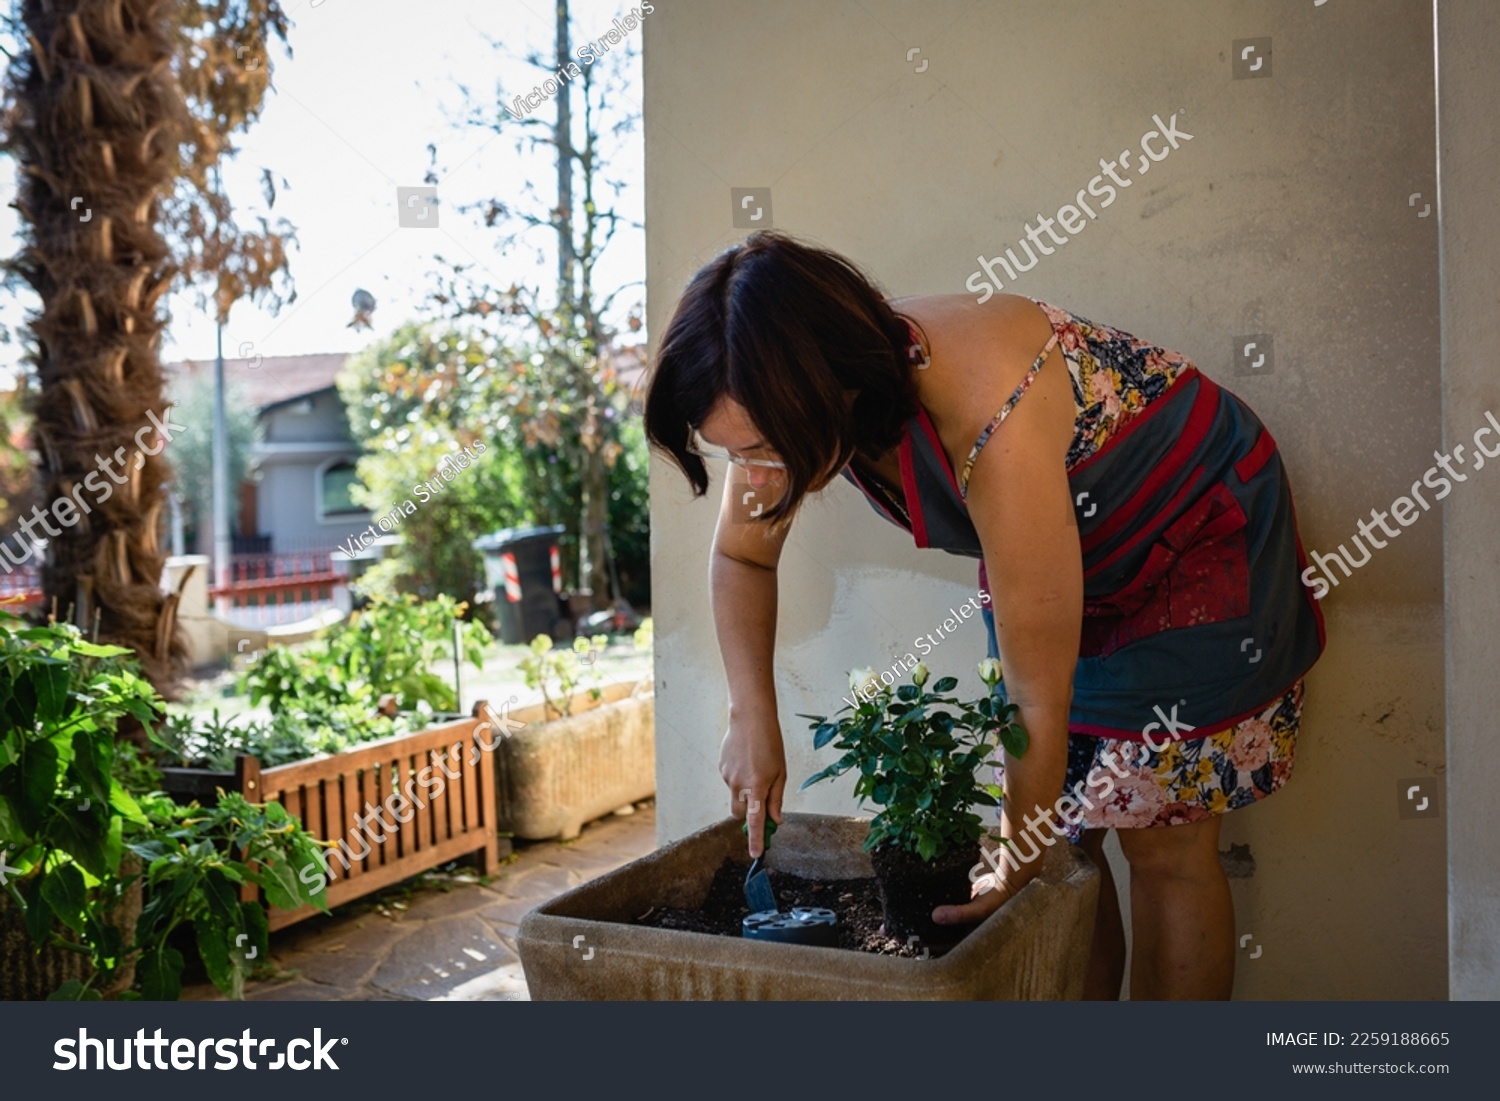 woman with dark hair and colourful dress digging to plant flowers in a pot in house garden #2259188665